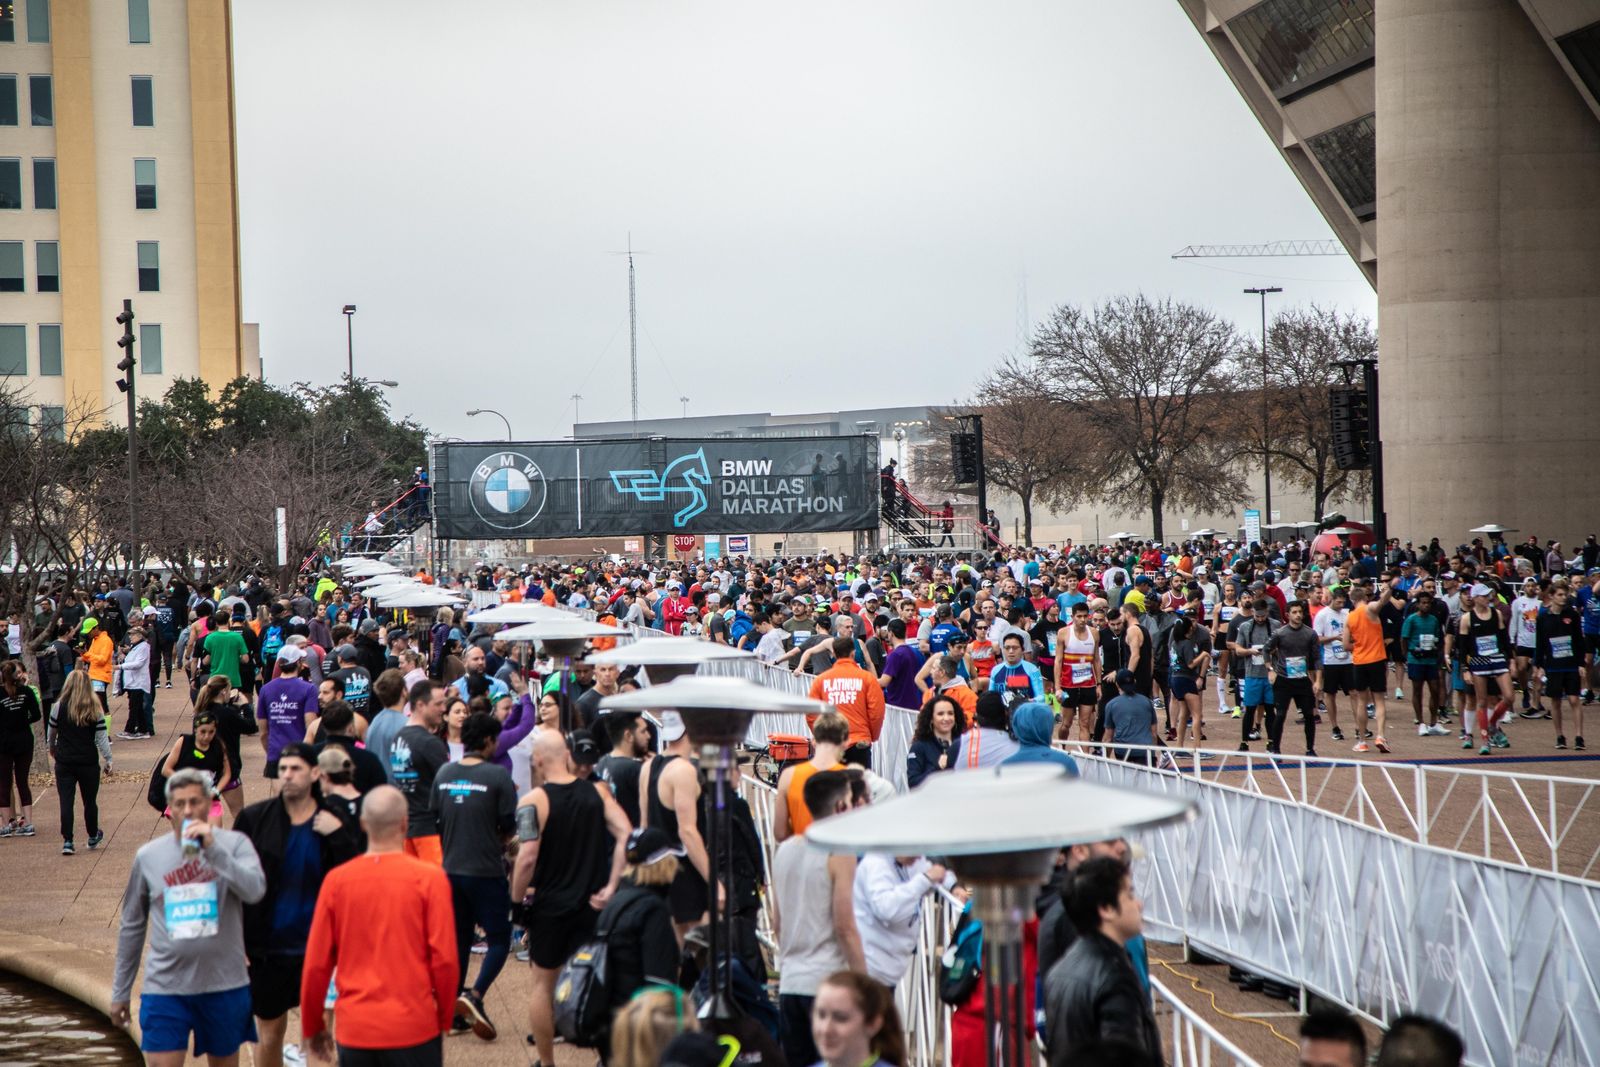 Runners flock to the BMW Dallas Marathon. Large crowds prepare in hopes of qualifying for the Boston Marathon